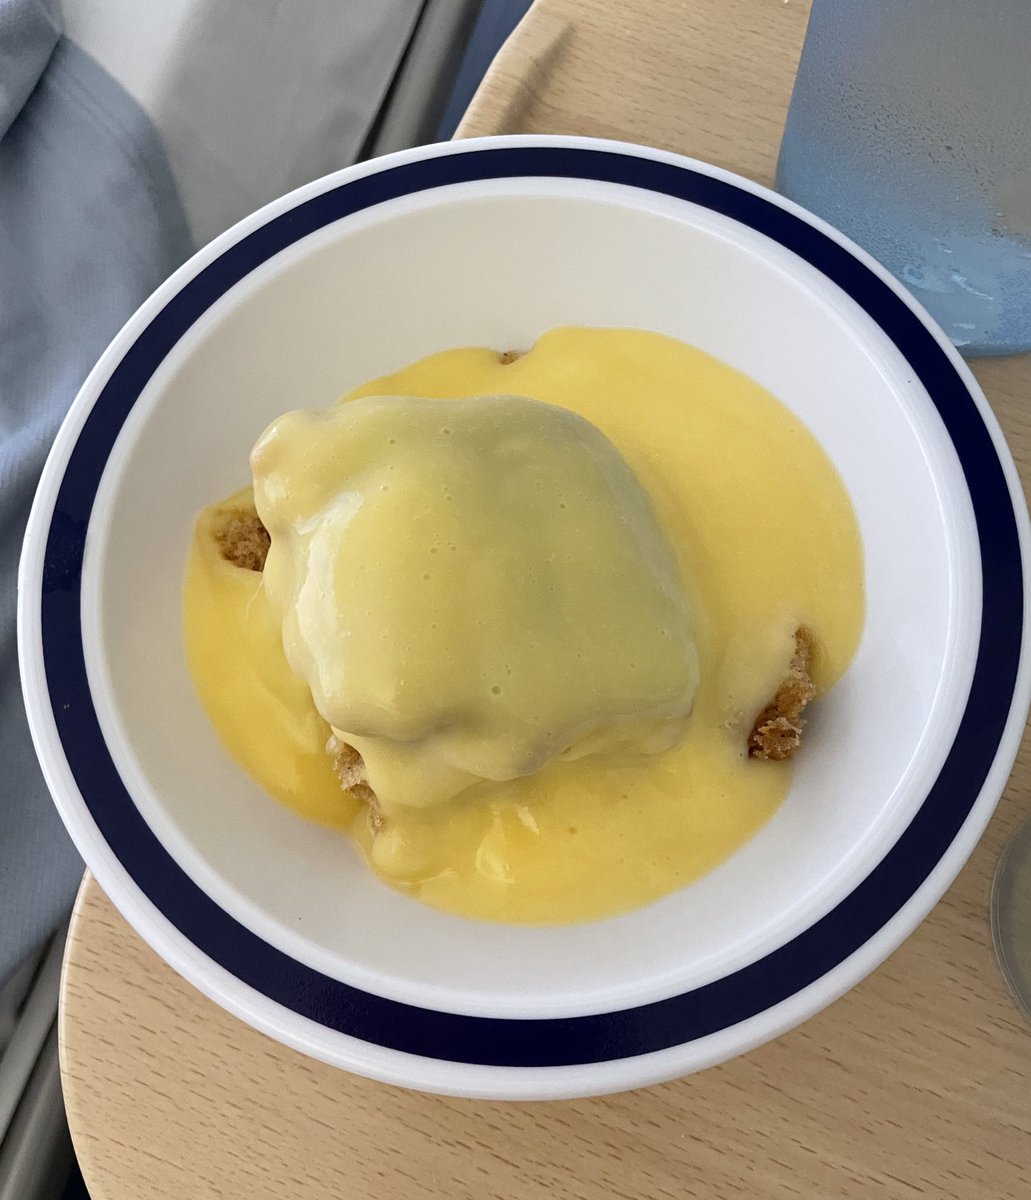 Visiting in hospital and the patient doesn’t want their sponge pudding and custard, so I’ve had to be a hero and eat it myself. One spoonful and I was transported straight back to school. Glorious. Shame that you have to go to school or hospital to get the world’s best puddings.